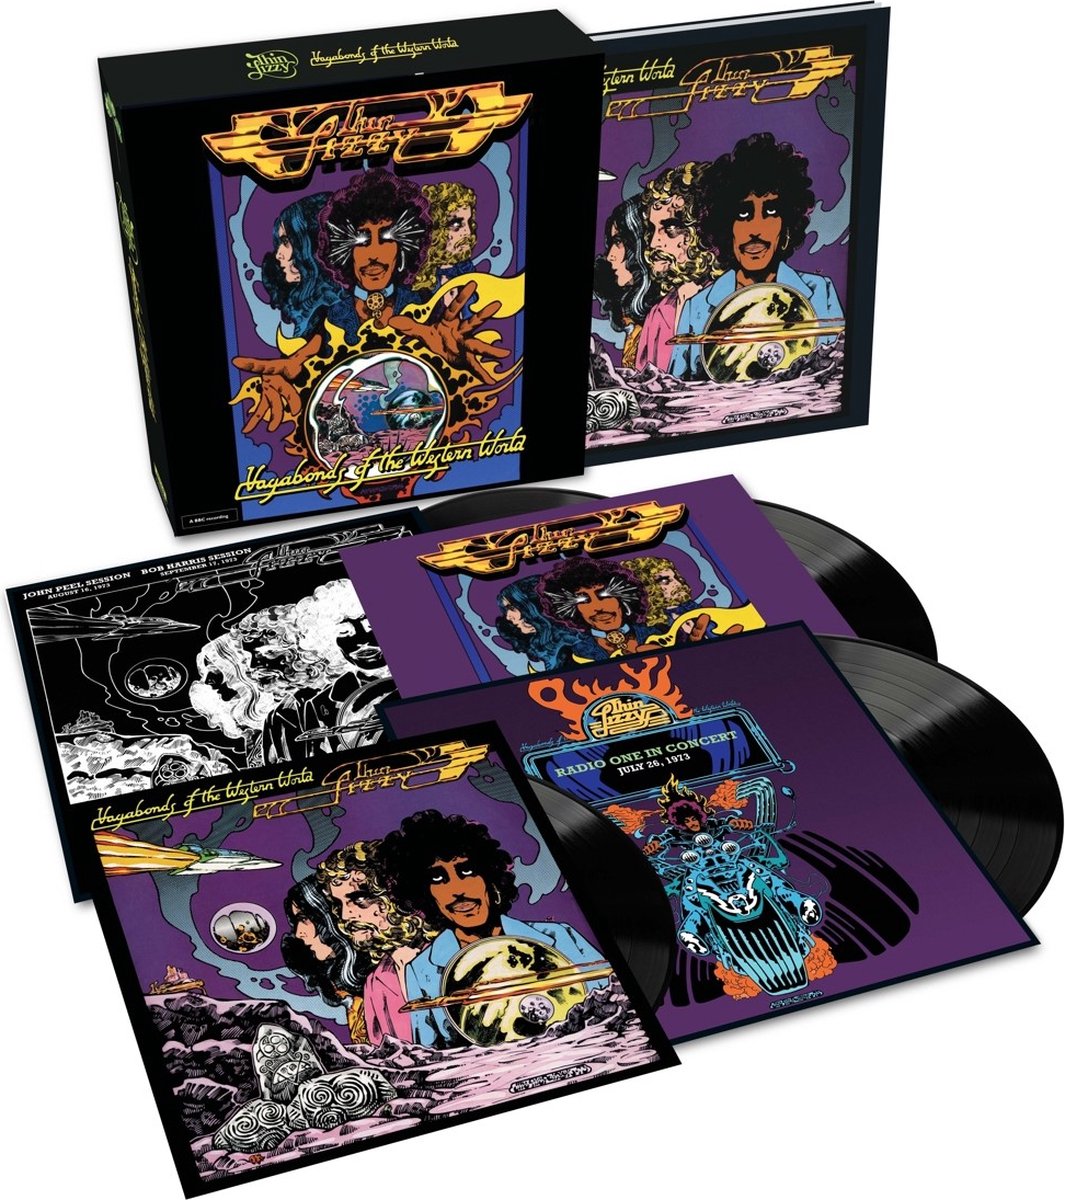 THIN LIZZY - Vagabonds Of The Western World - Limited Deluxe Edition